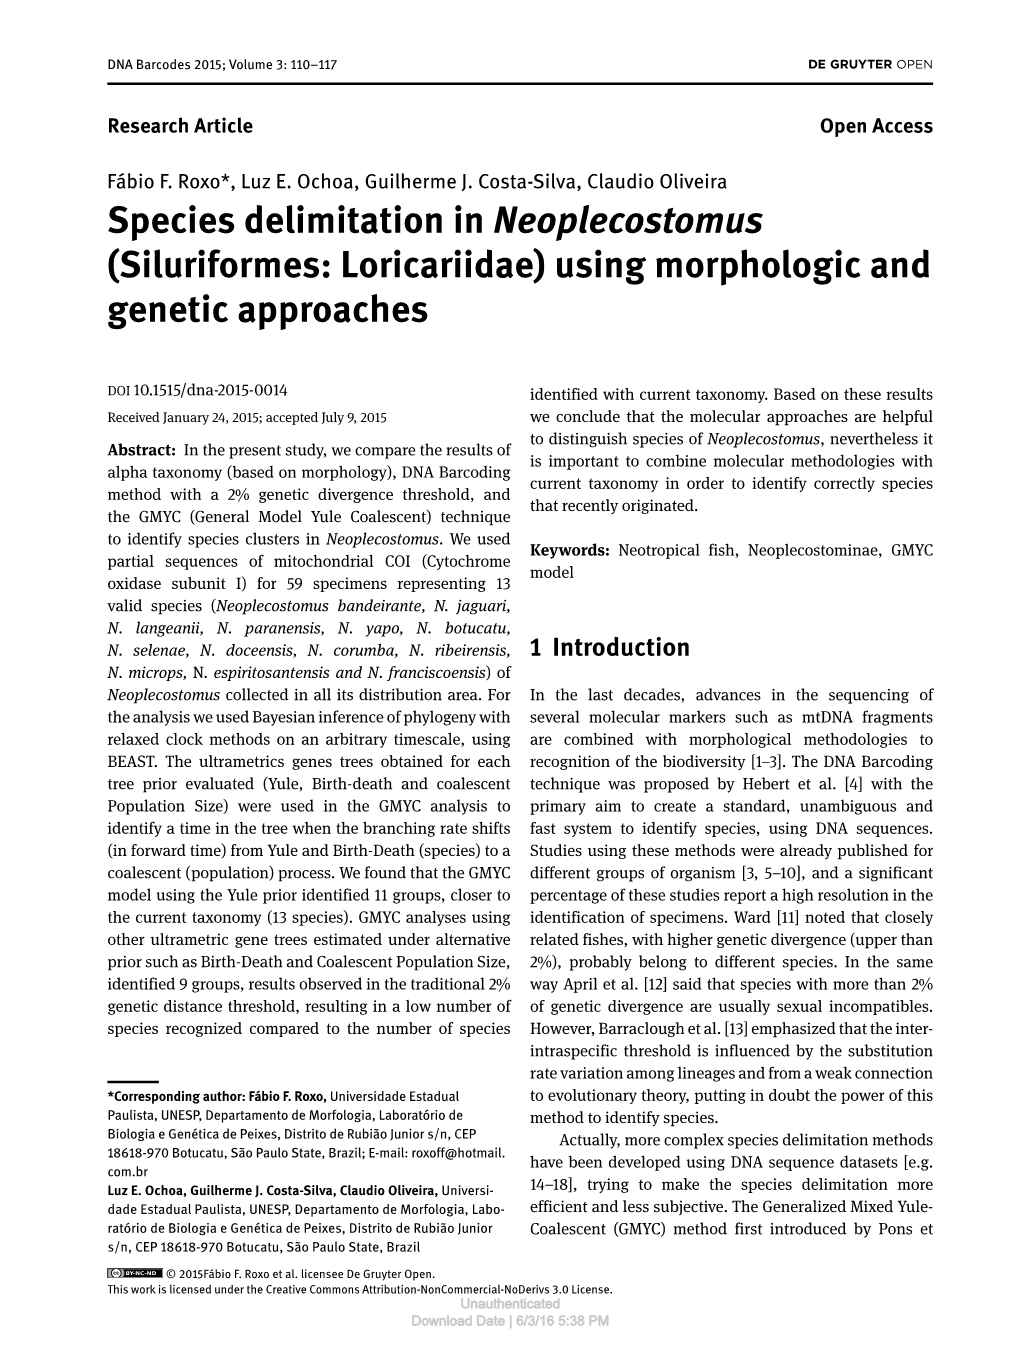 Species Delimitation in Neoplecostomus (Siluriformes: Loricariidae) Using Morphologic and Genetic Approaches